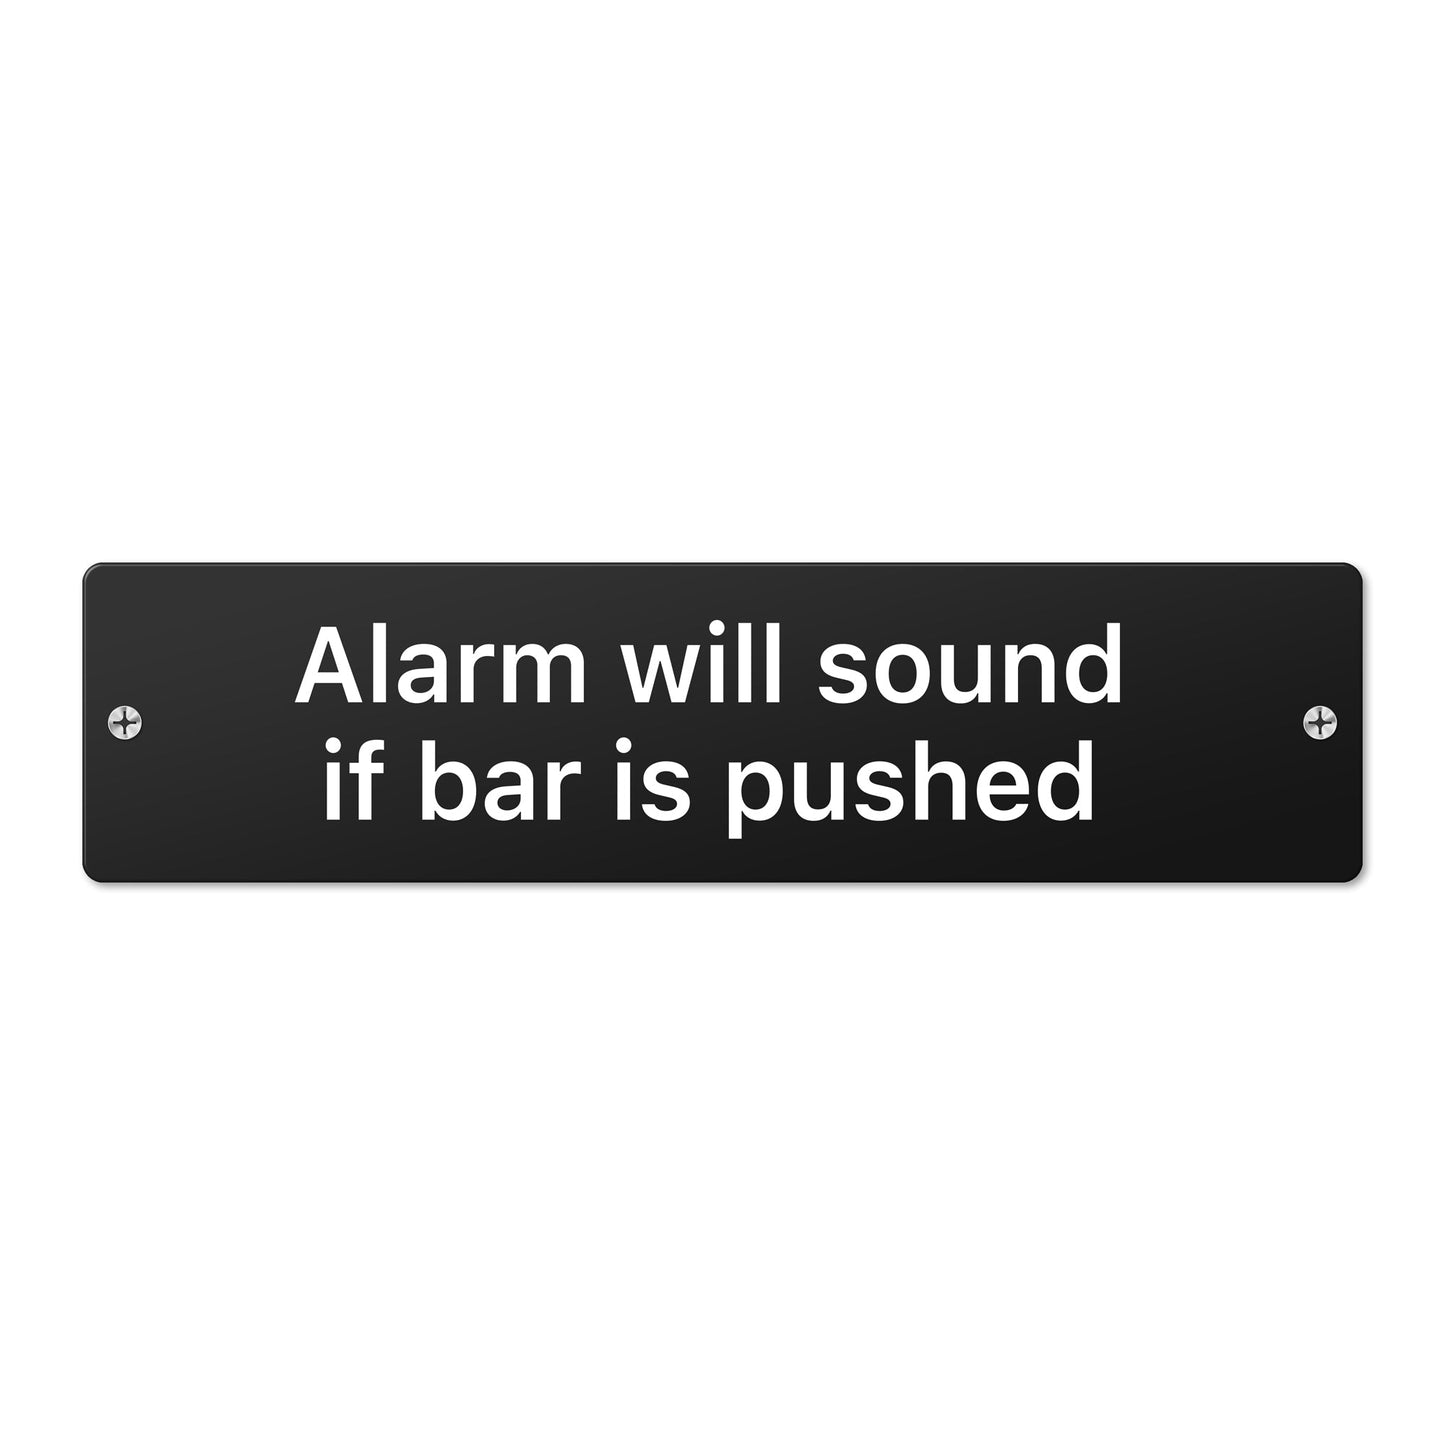 Alarm will sound if bar is pushed